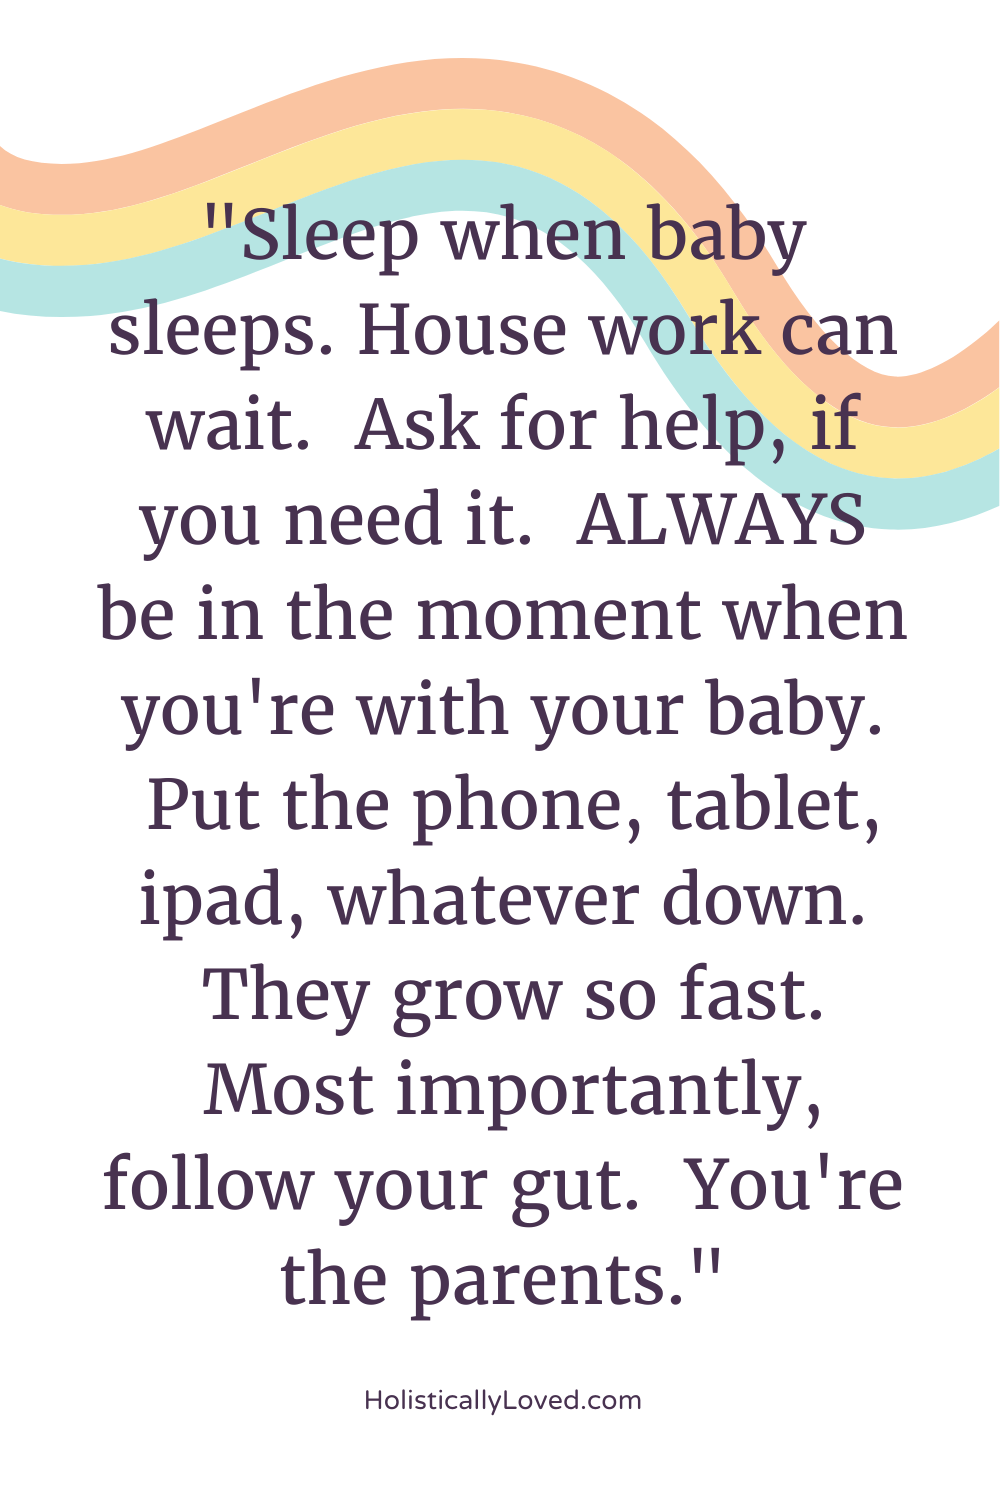 Amazing Advice For First Time Parents From Experienced Moms And Dads Holistically Loved